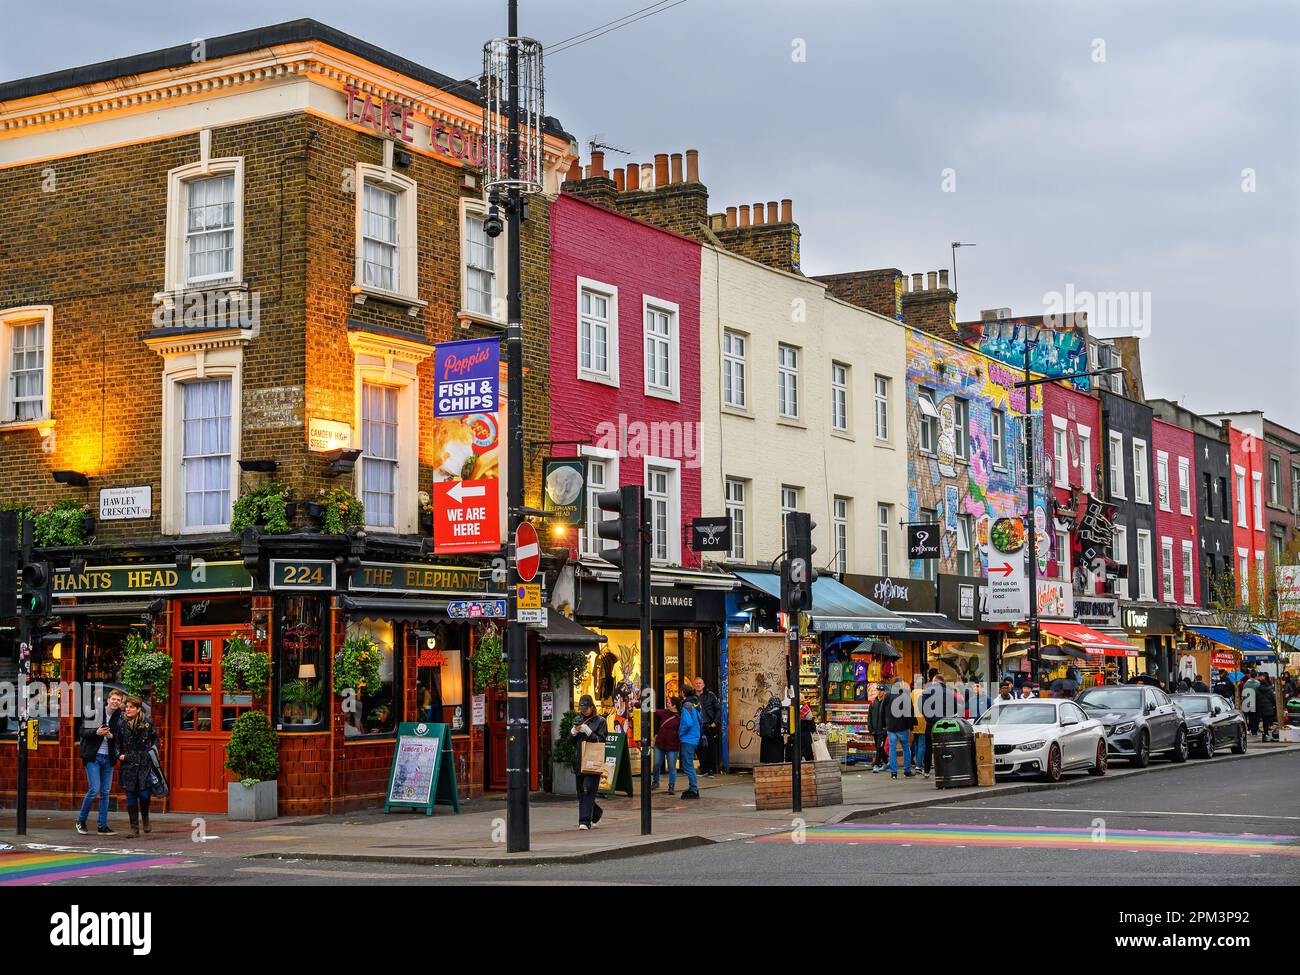 Camden Town, London, UK: Camden High Street in the early evening with colorful buildings and people. Stock Photo